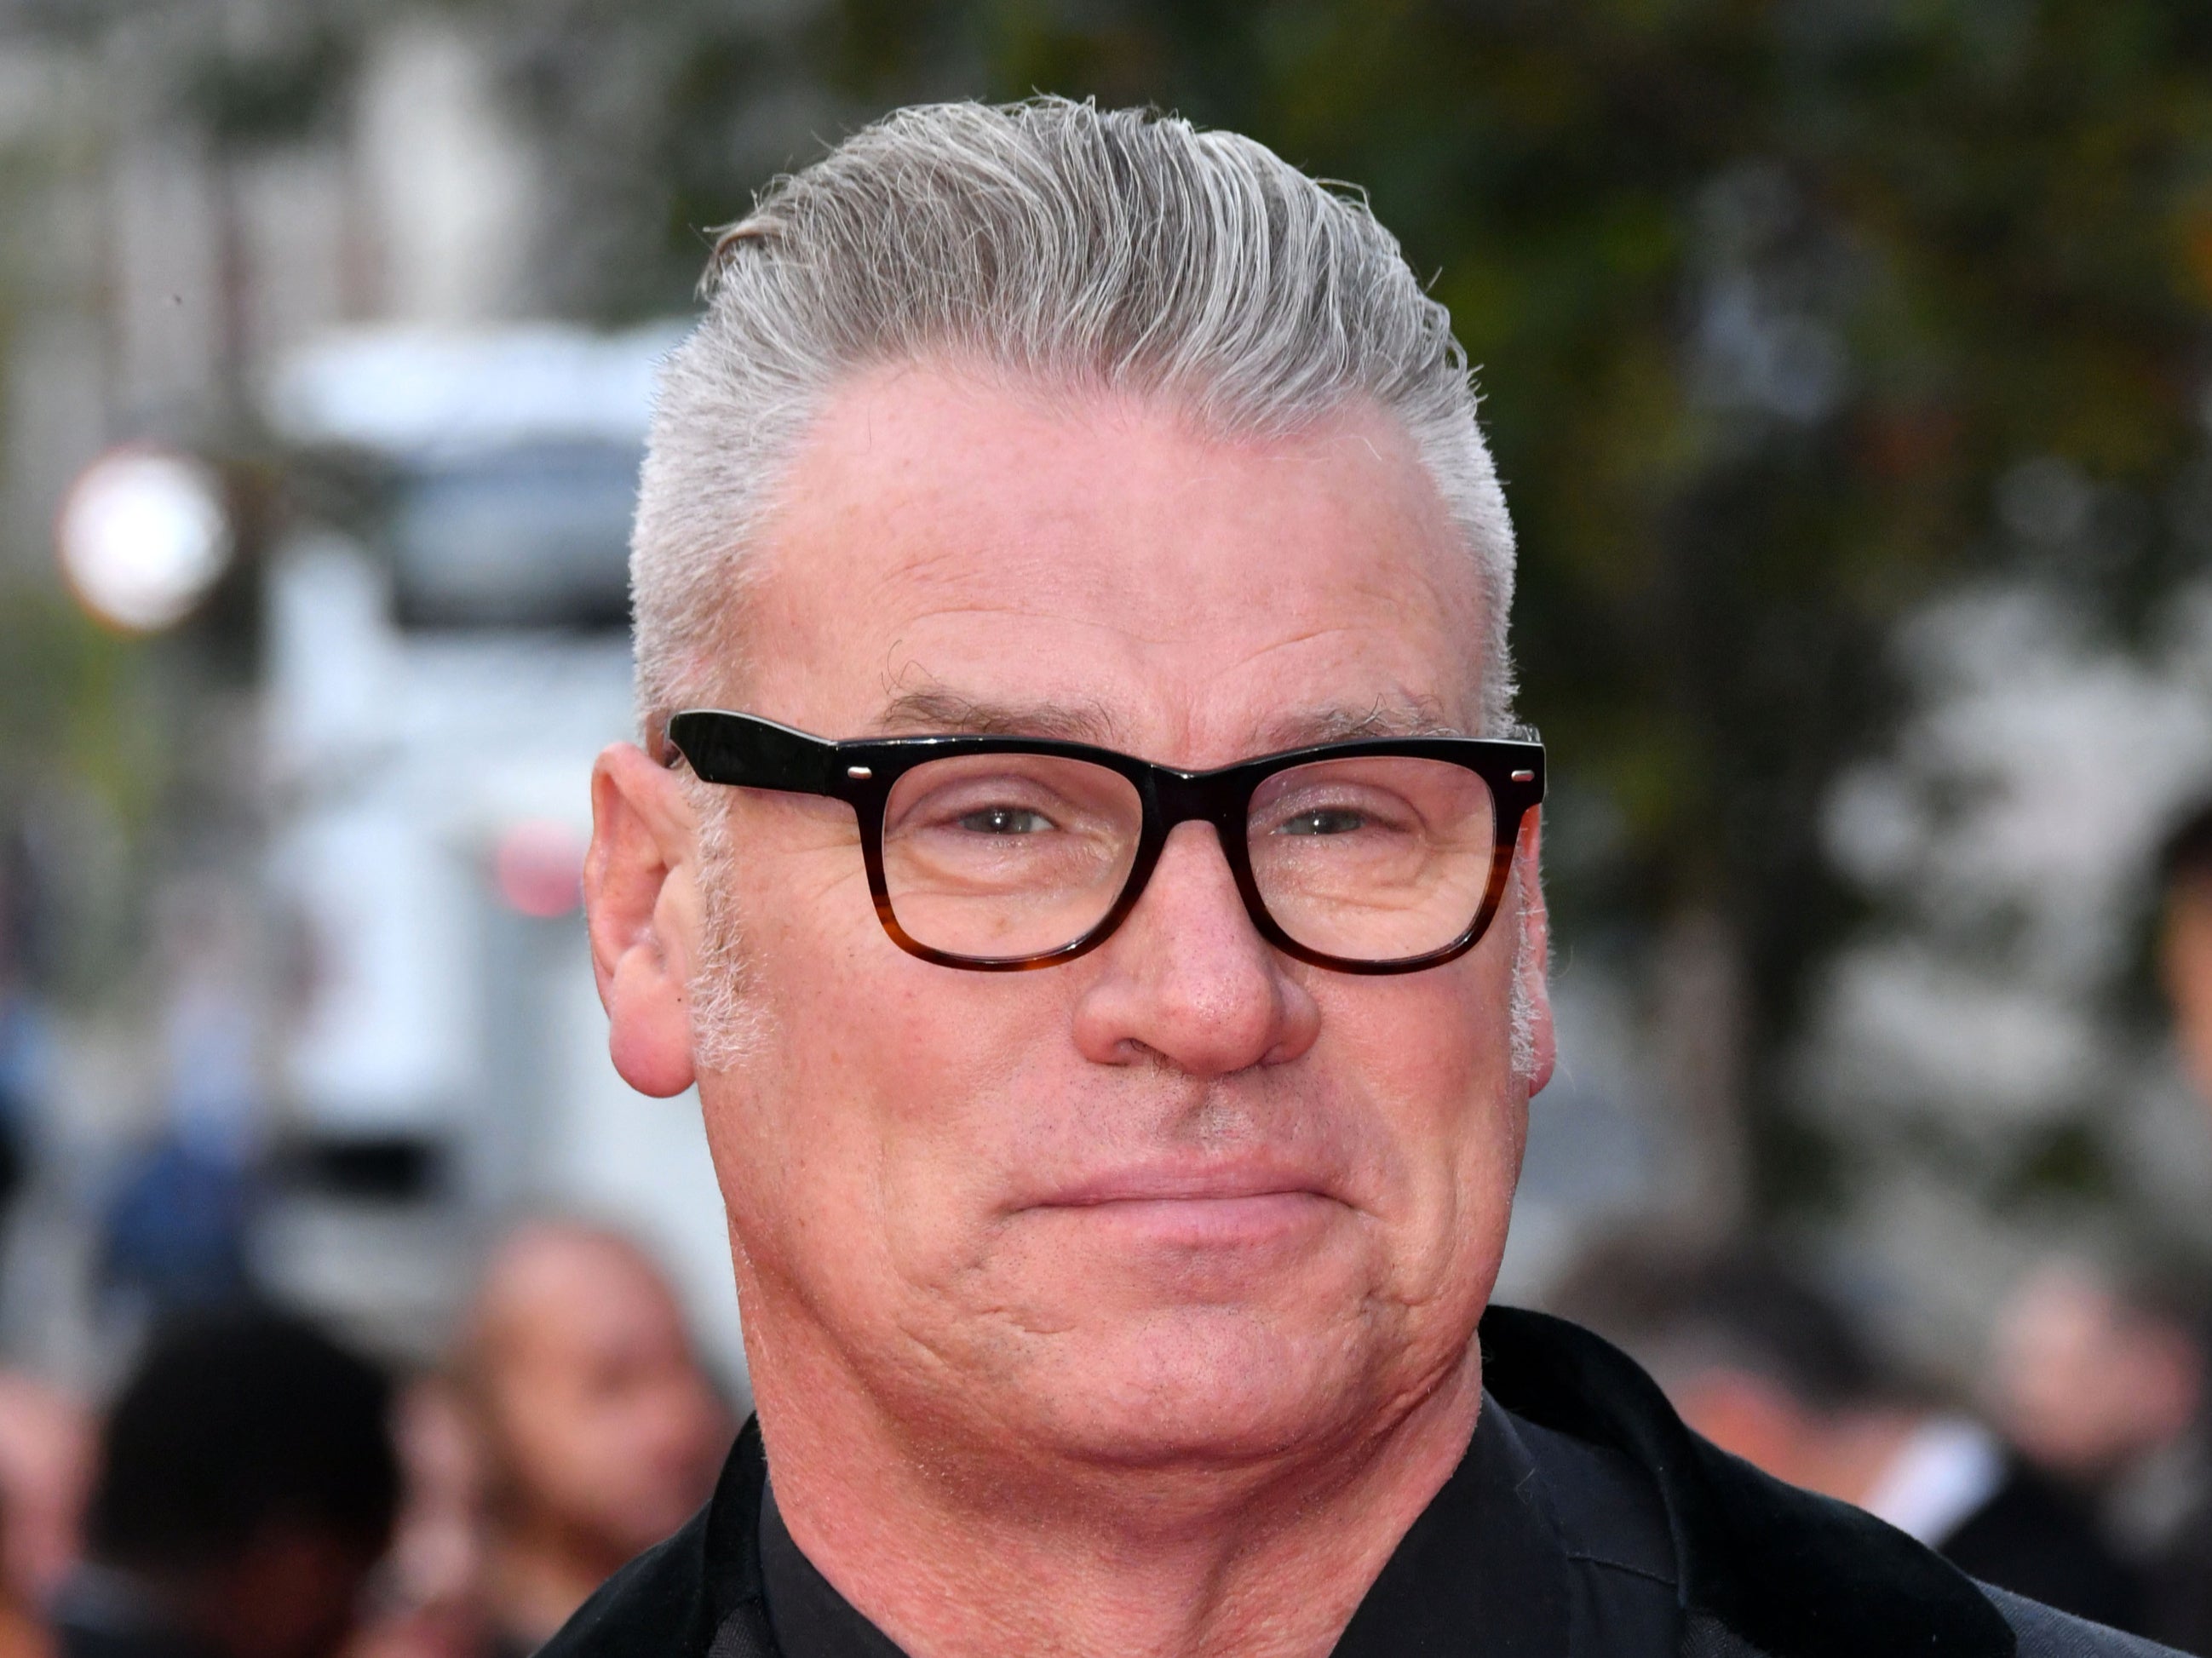 Film critic Mark Kermode was ‘genuinely saddened’ by the news